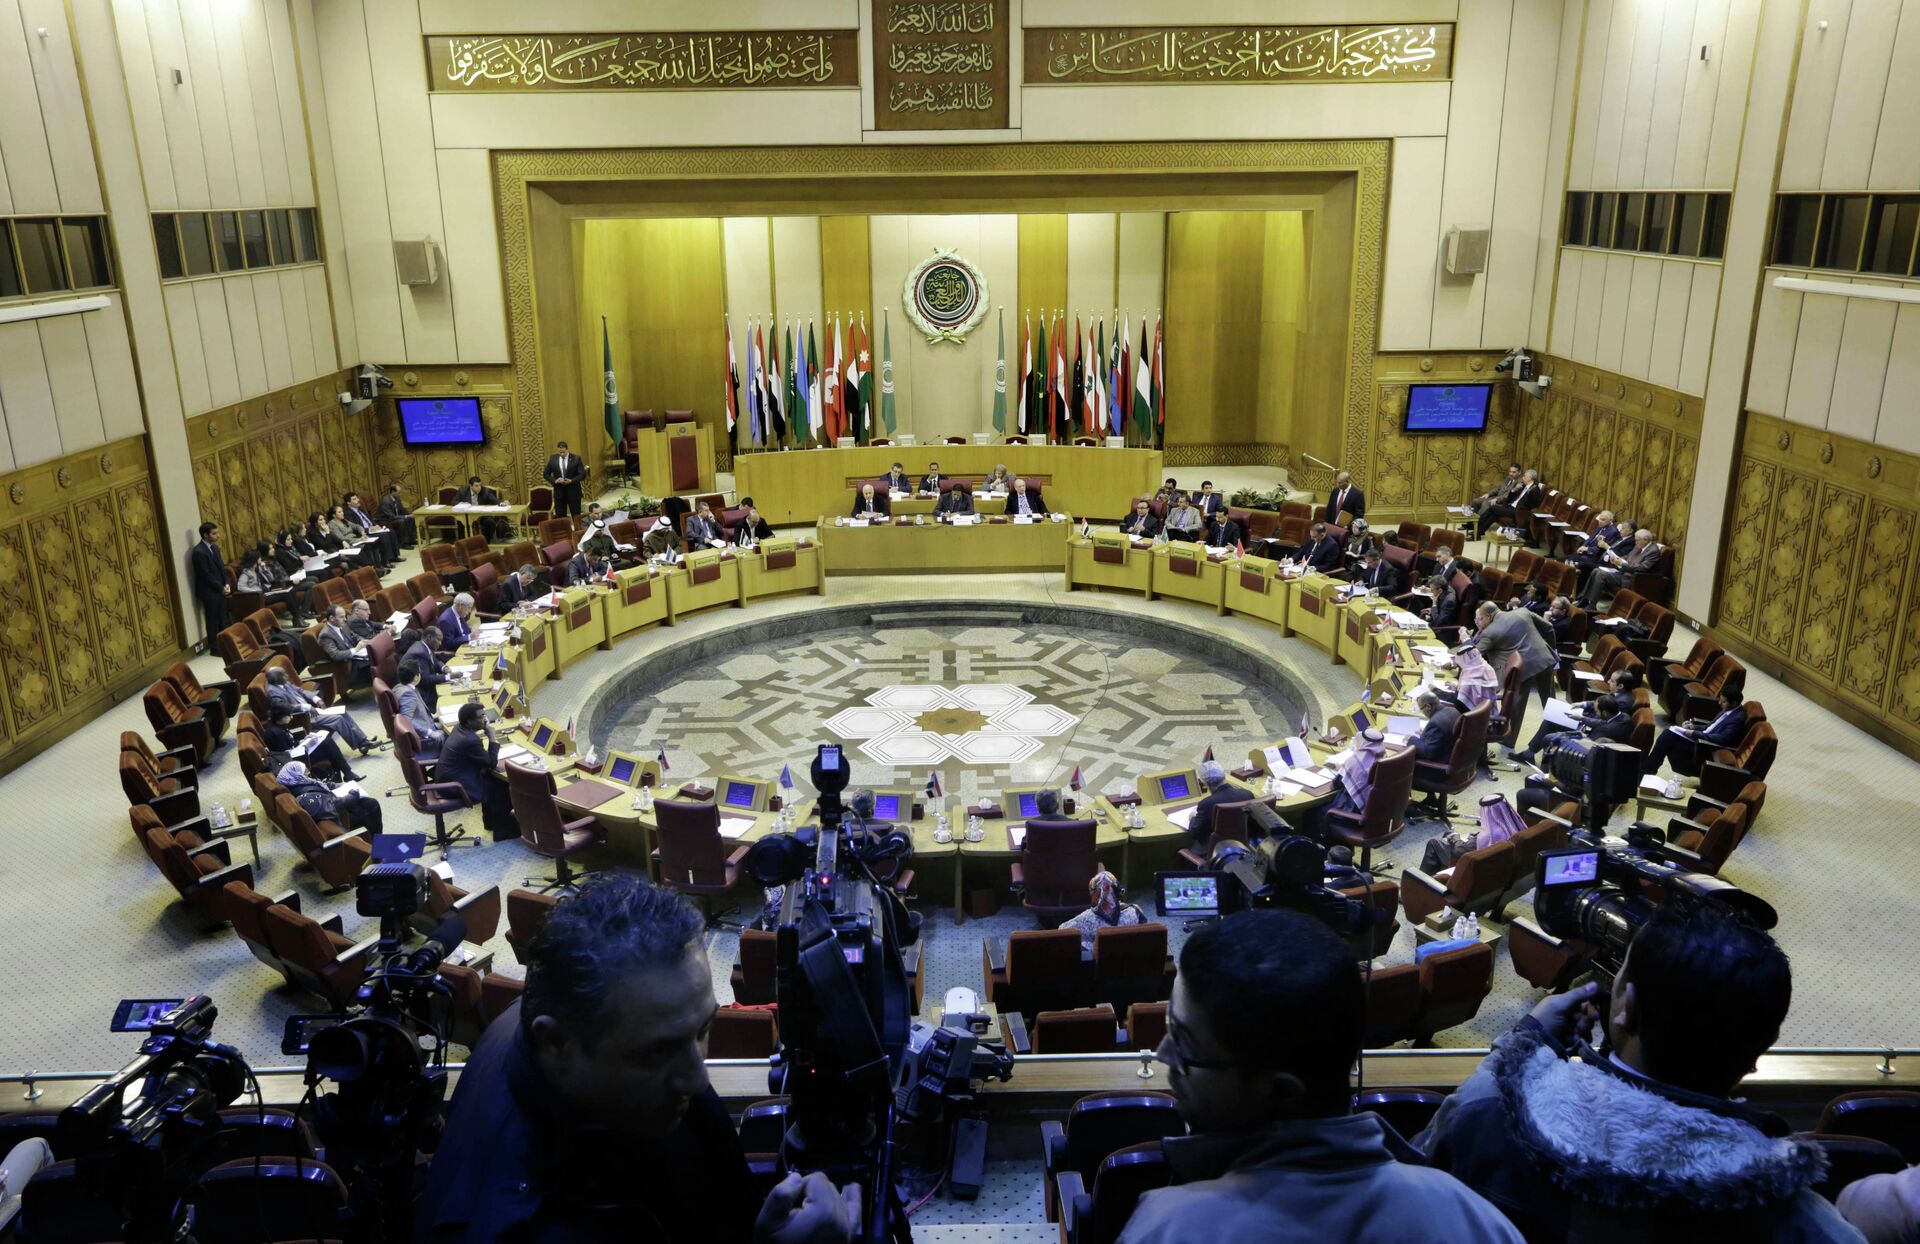 Representatives of the Arab League attend an emergency meeting to discuss the conflict in Libya, at the Arab League headquarters in Cairo, Egypt, Monday, Jan. 5, 2015. - Sputnik International, 1920, 26.11.2021